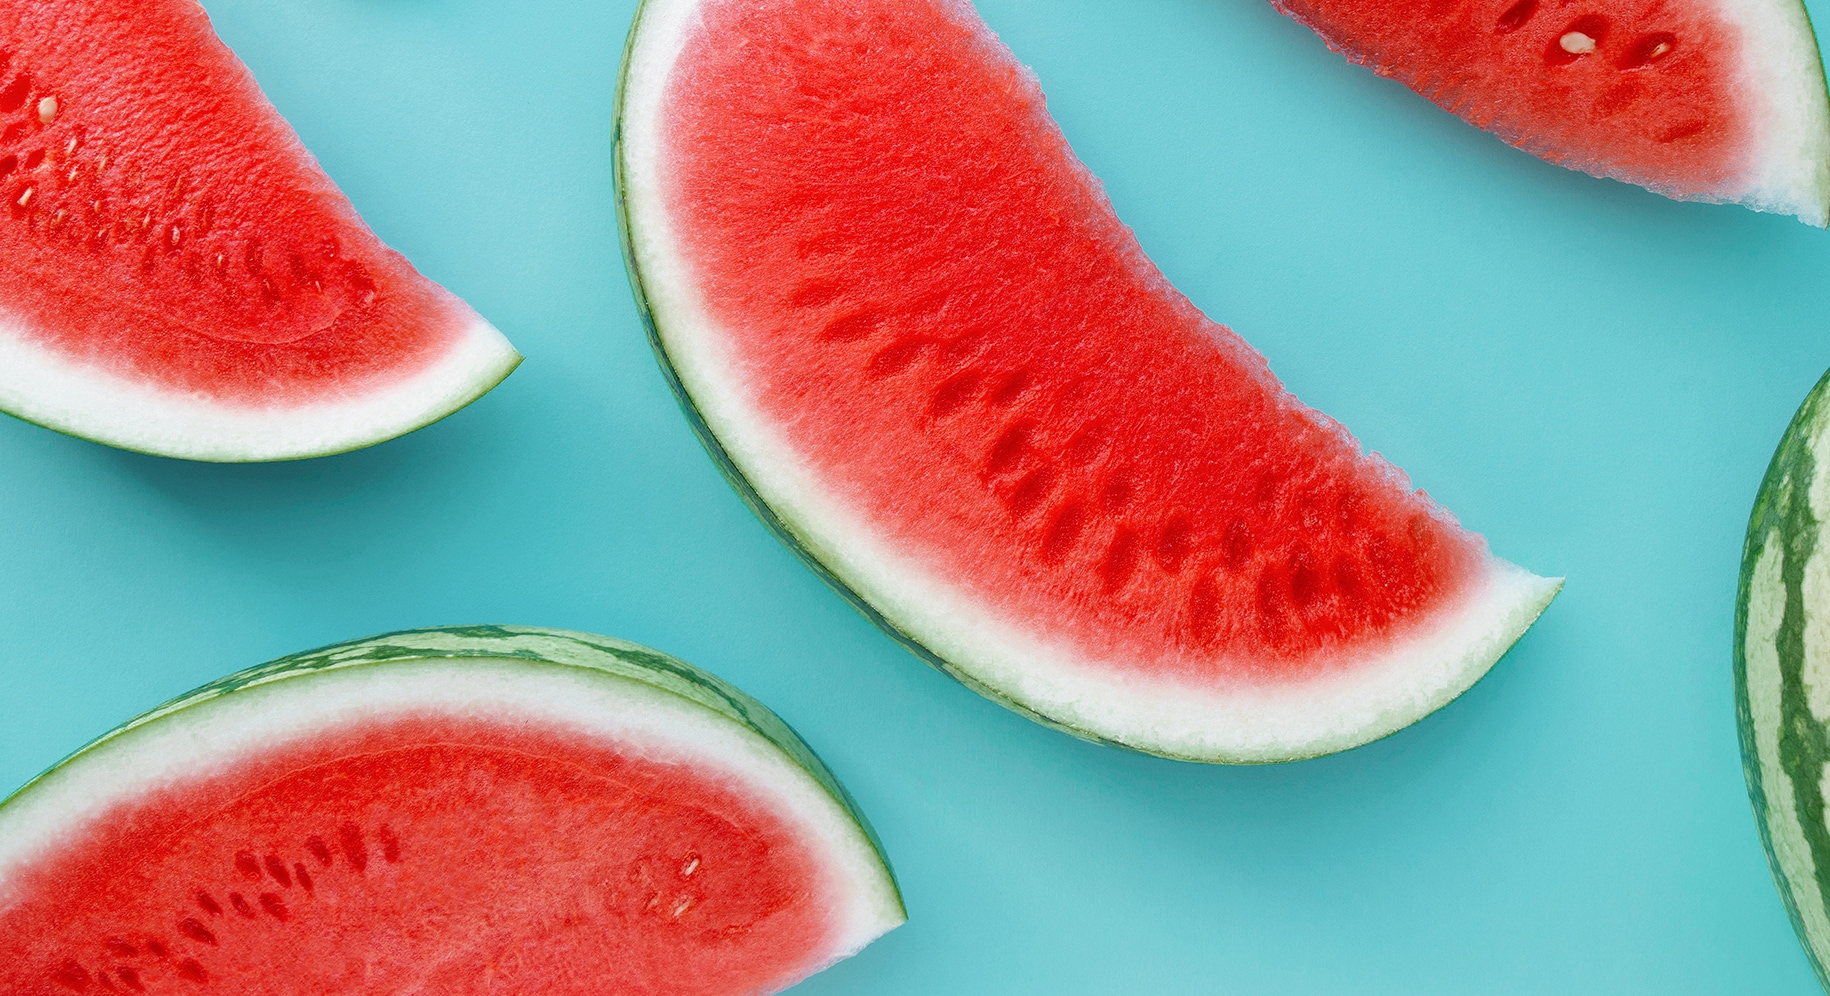 slices of watermelon on a table